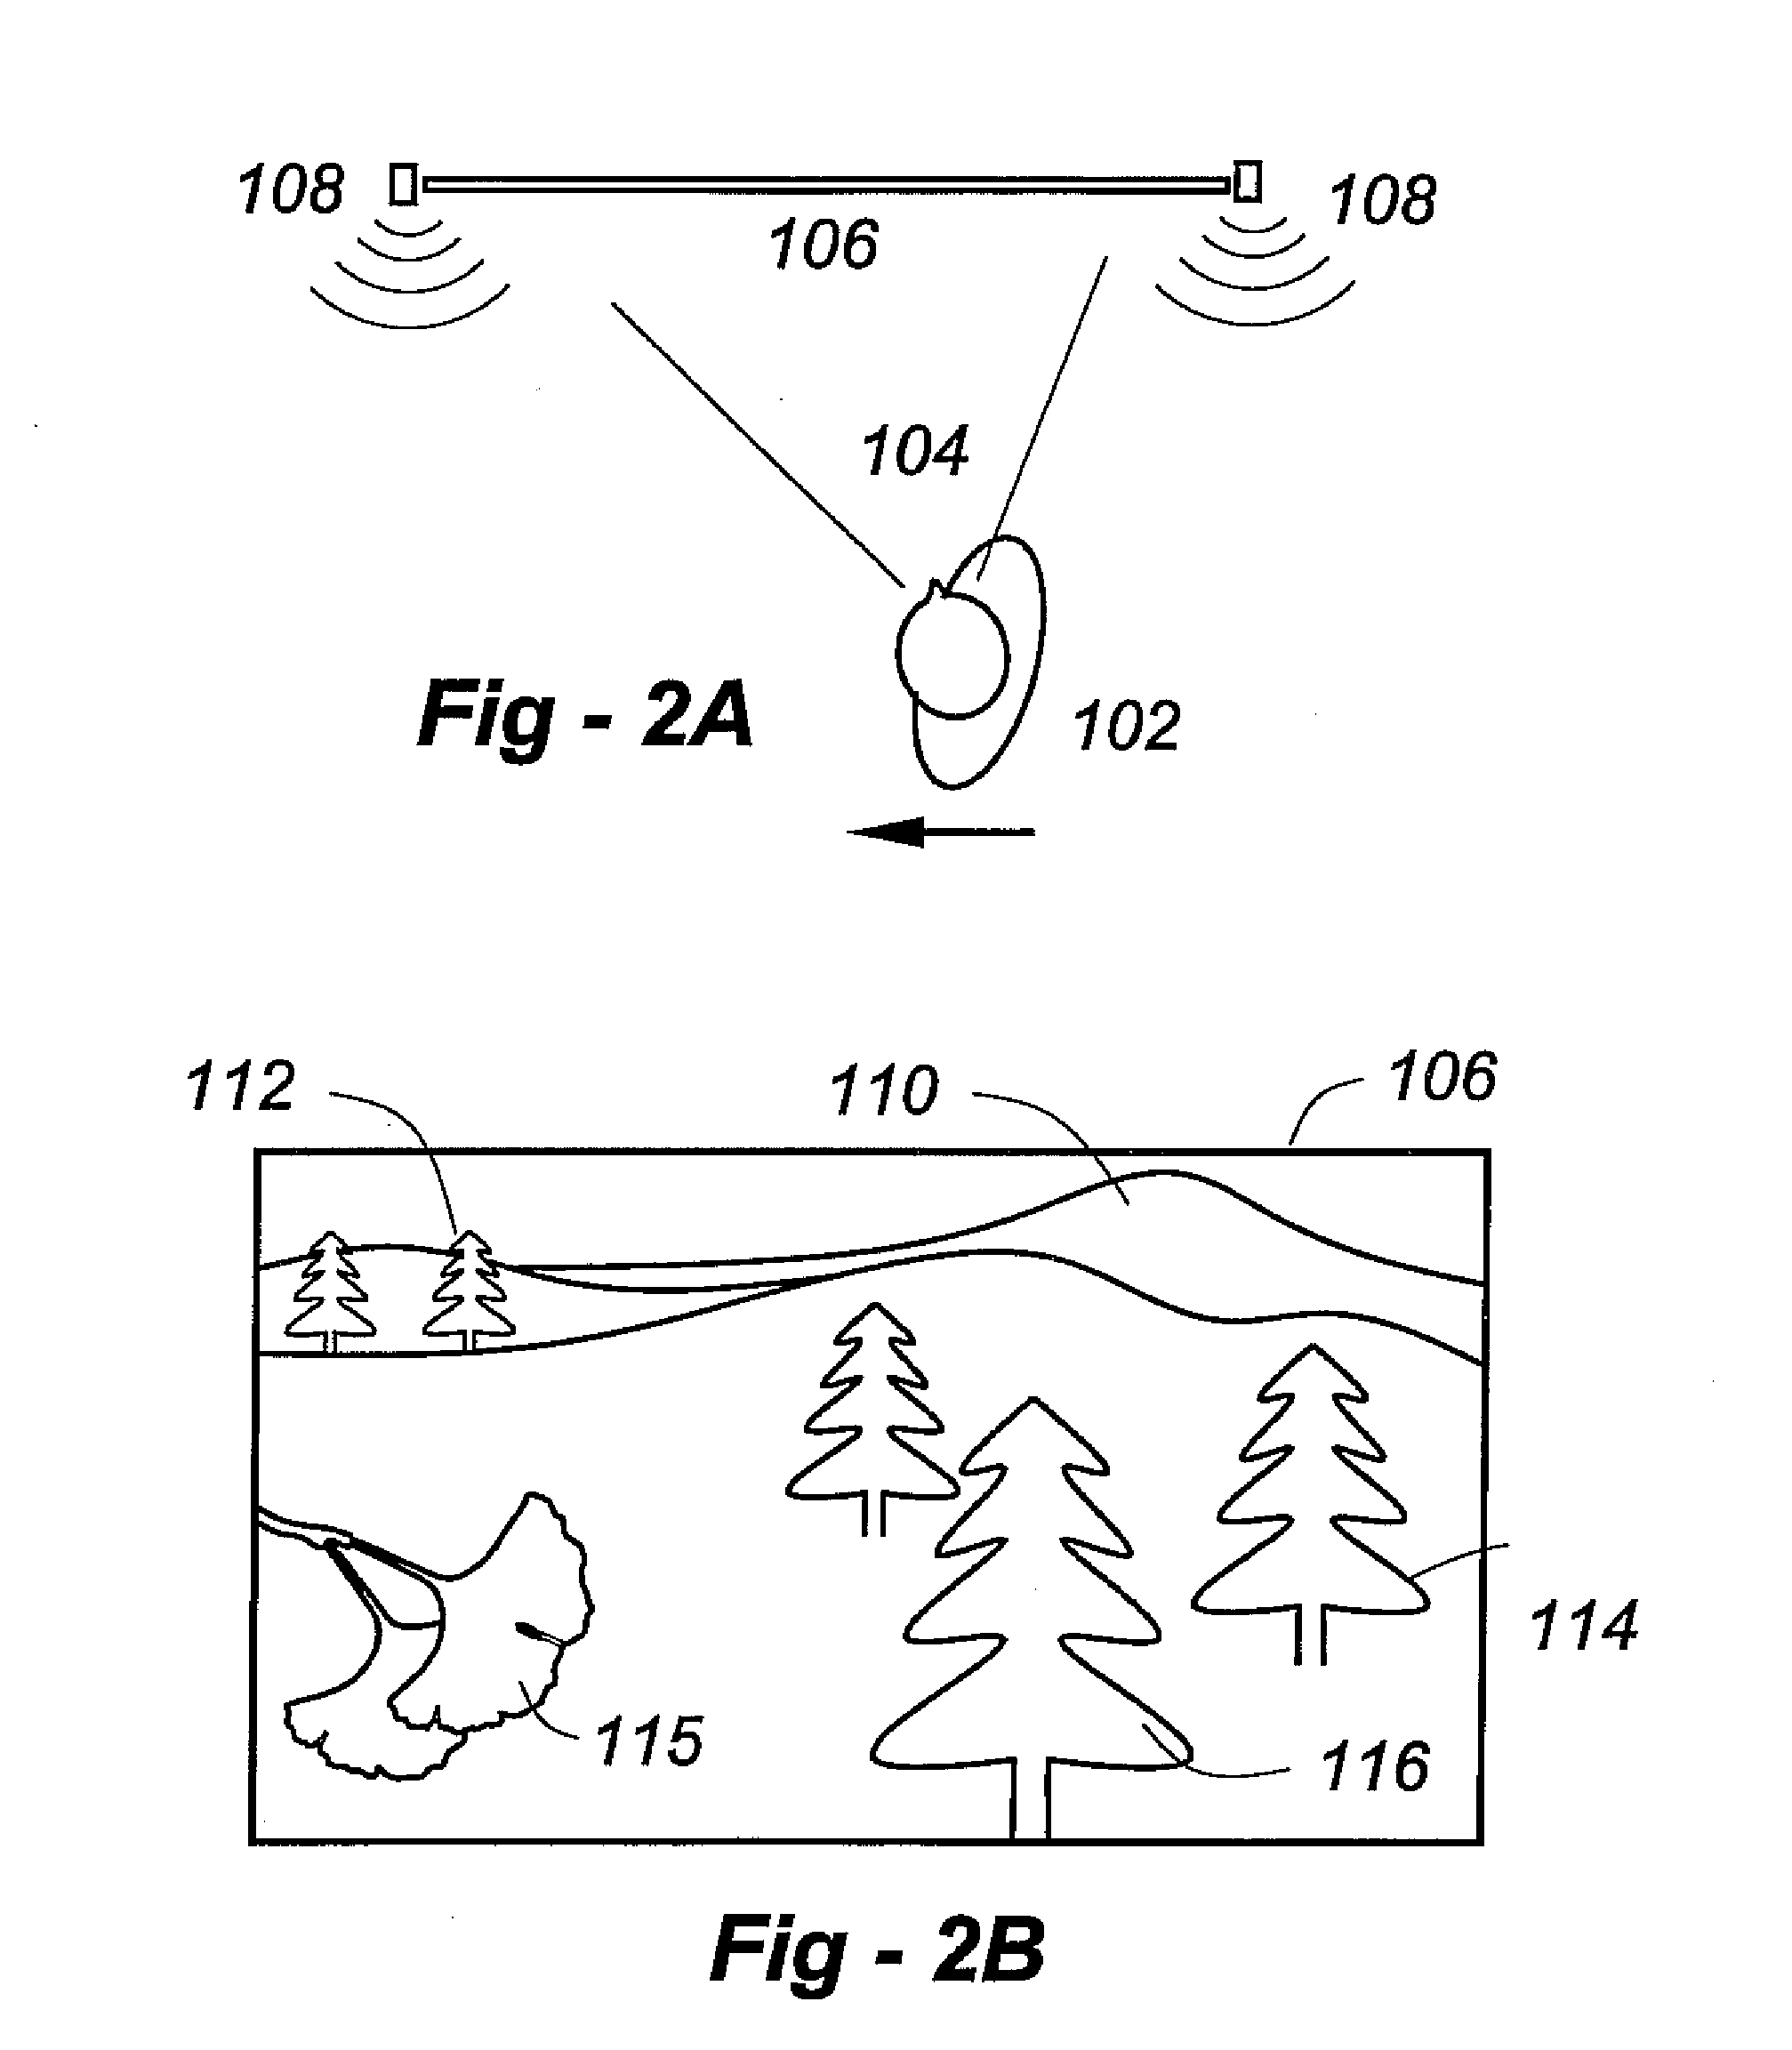 Perspective altering display system